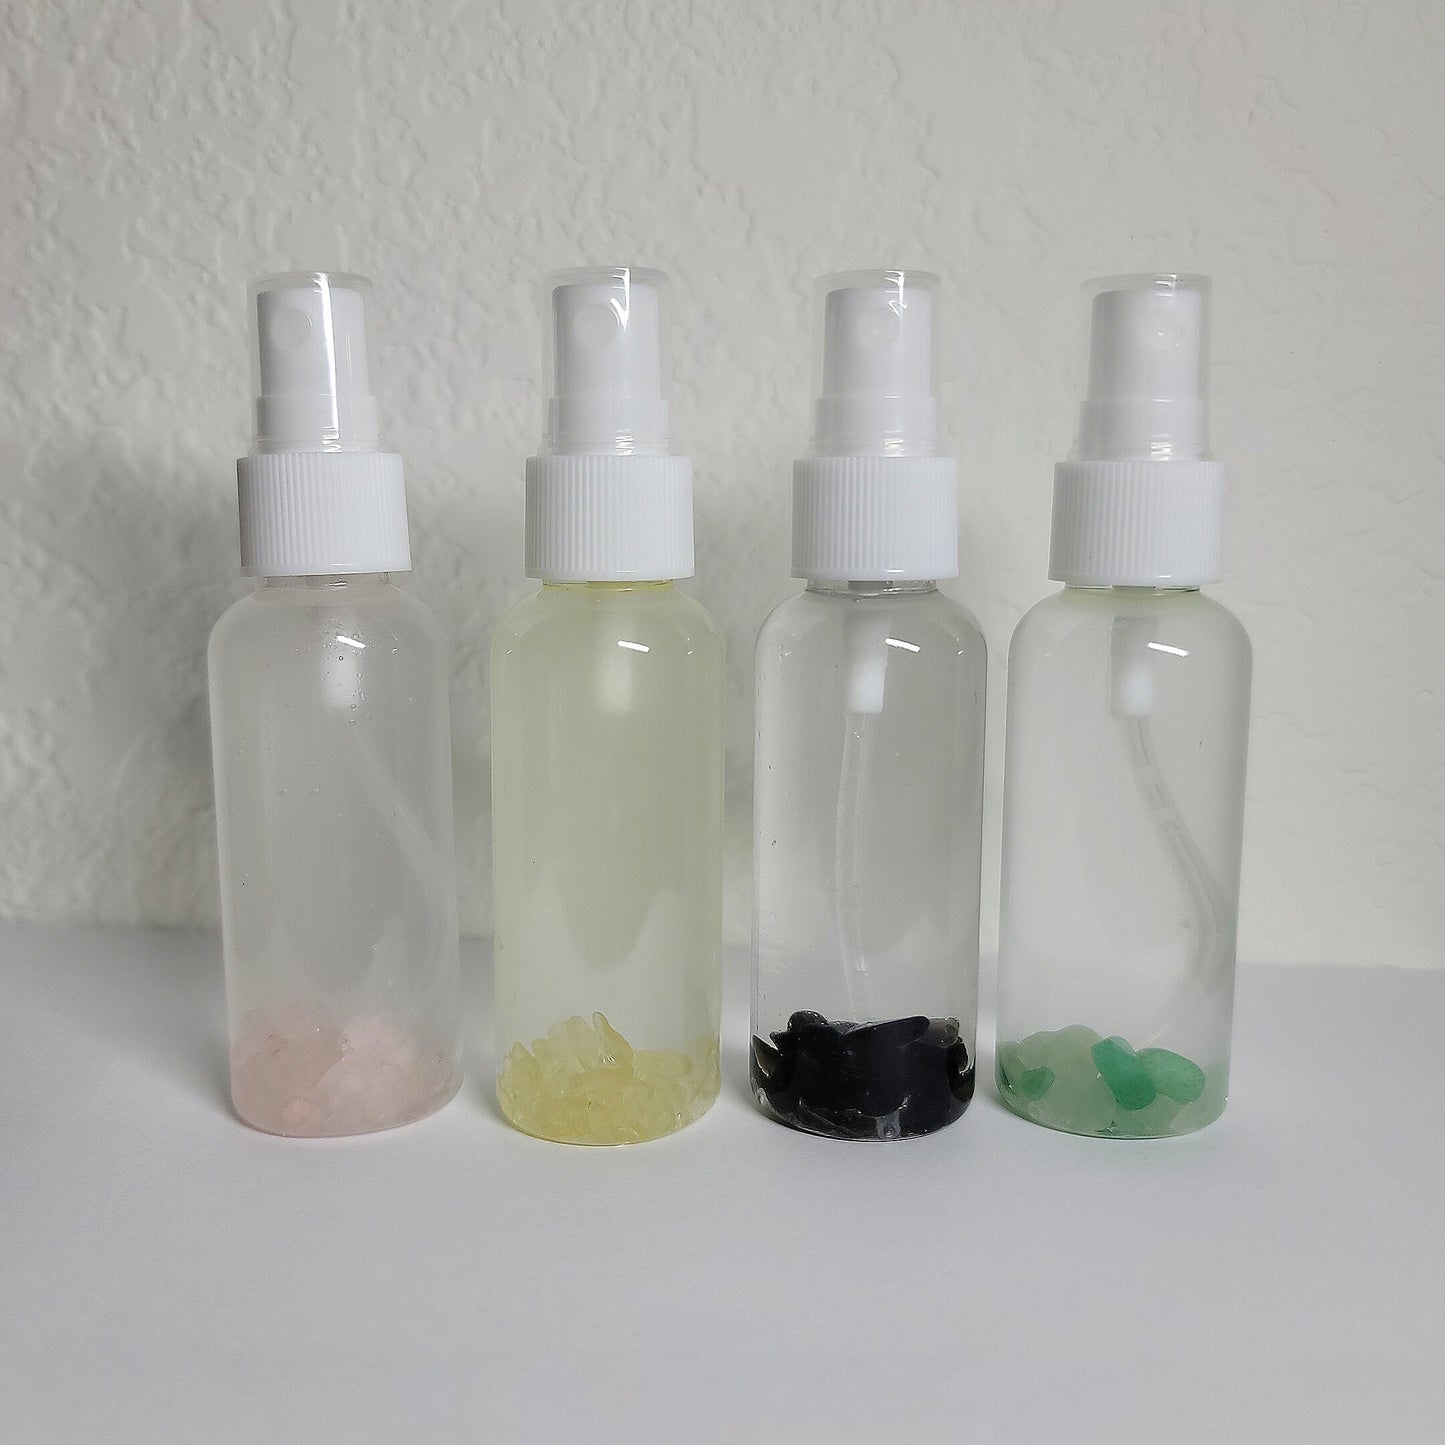 Intention Setting Spray - Crystal Infused - Protection, Wealth, Love, Luck, Abundance, Prosperity, Psychic - Law of Attraction - Home Gifts